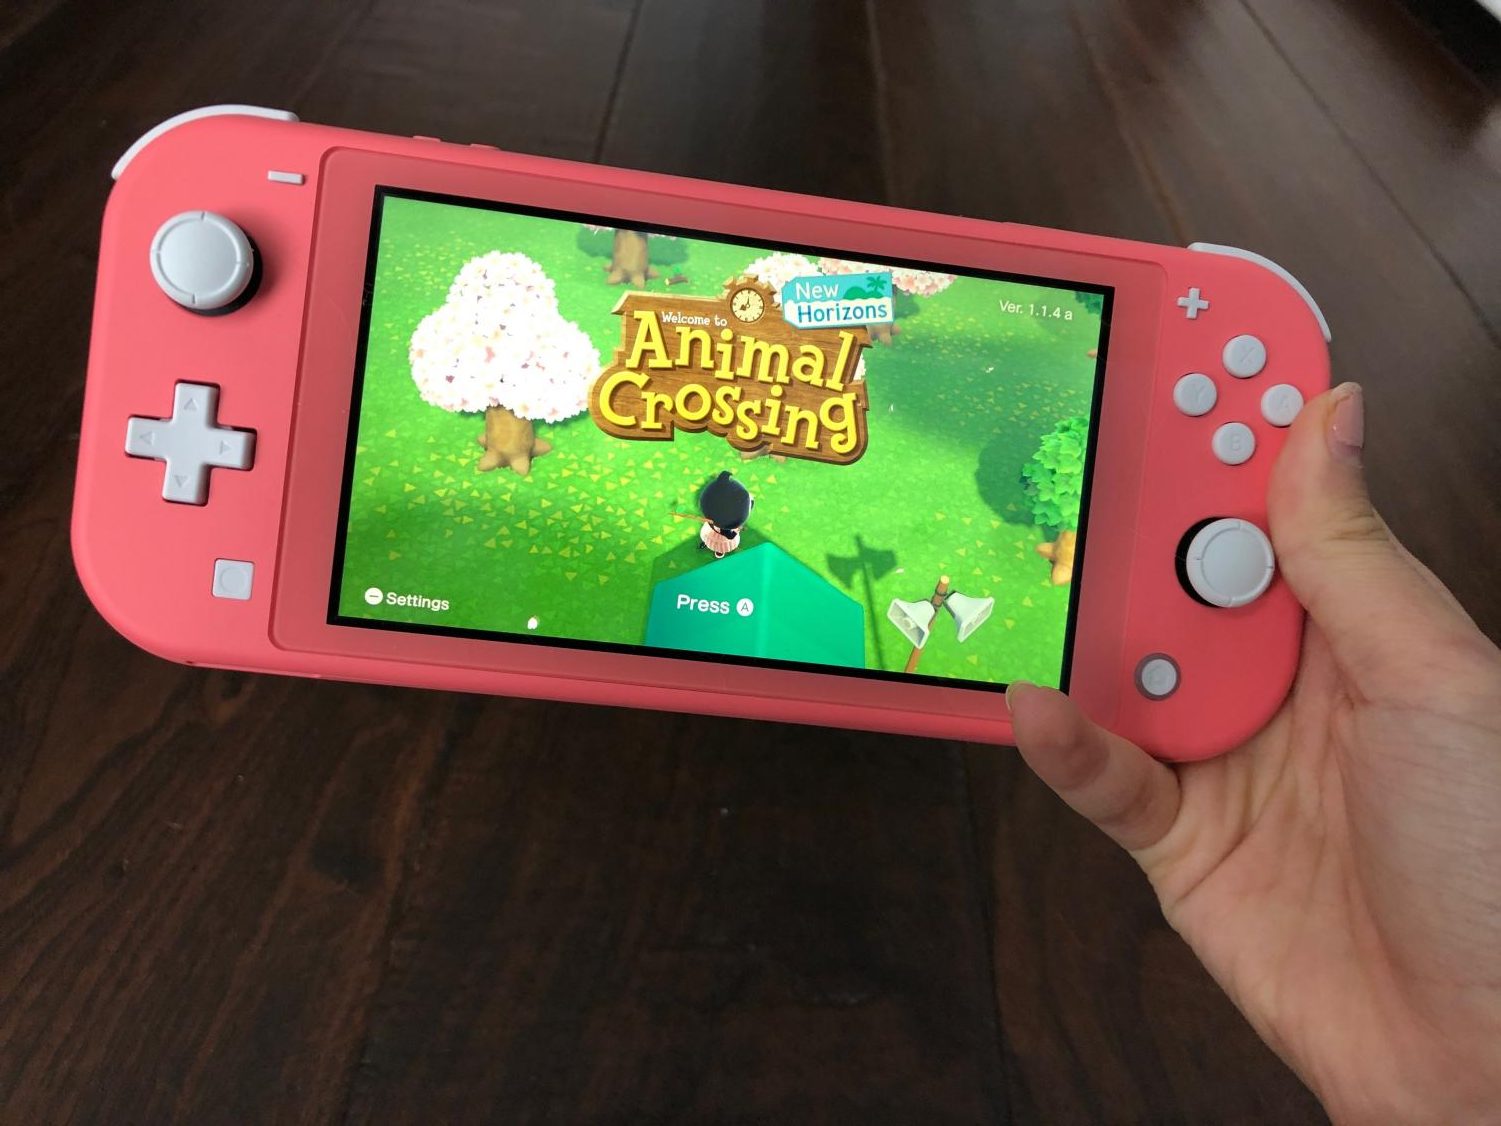 animal crossing console sold out